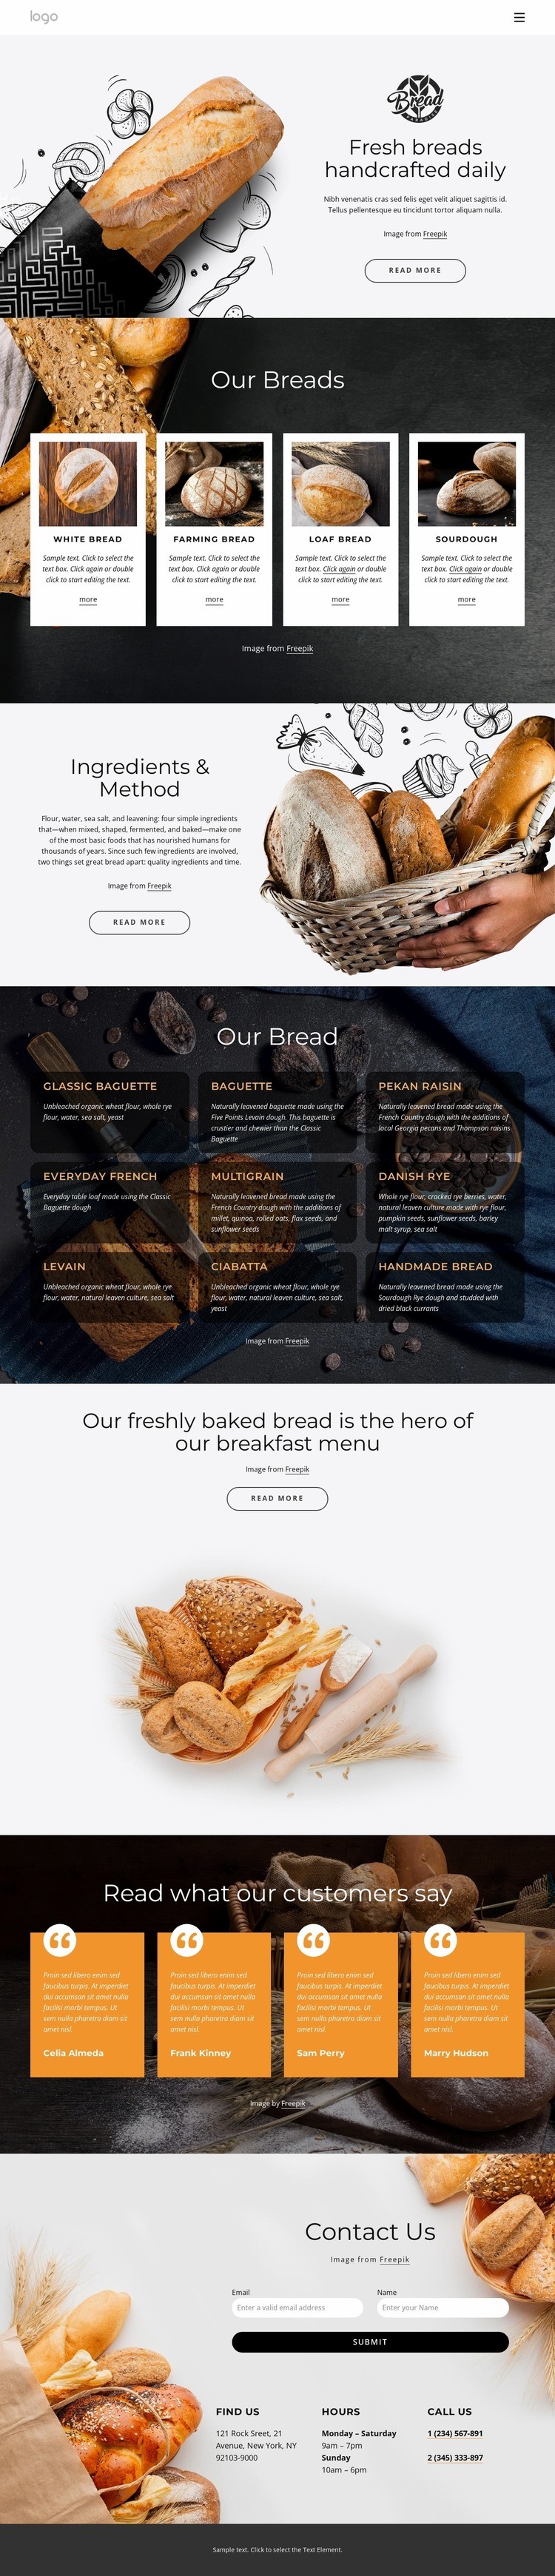 Fresh bread handcrafted every day Elementor Template Alternative